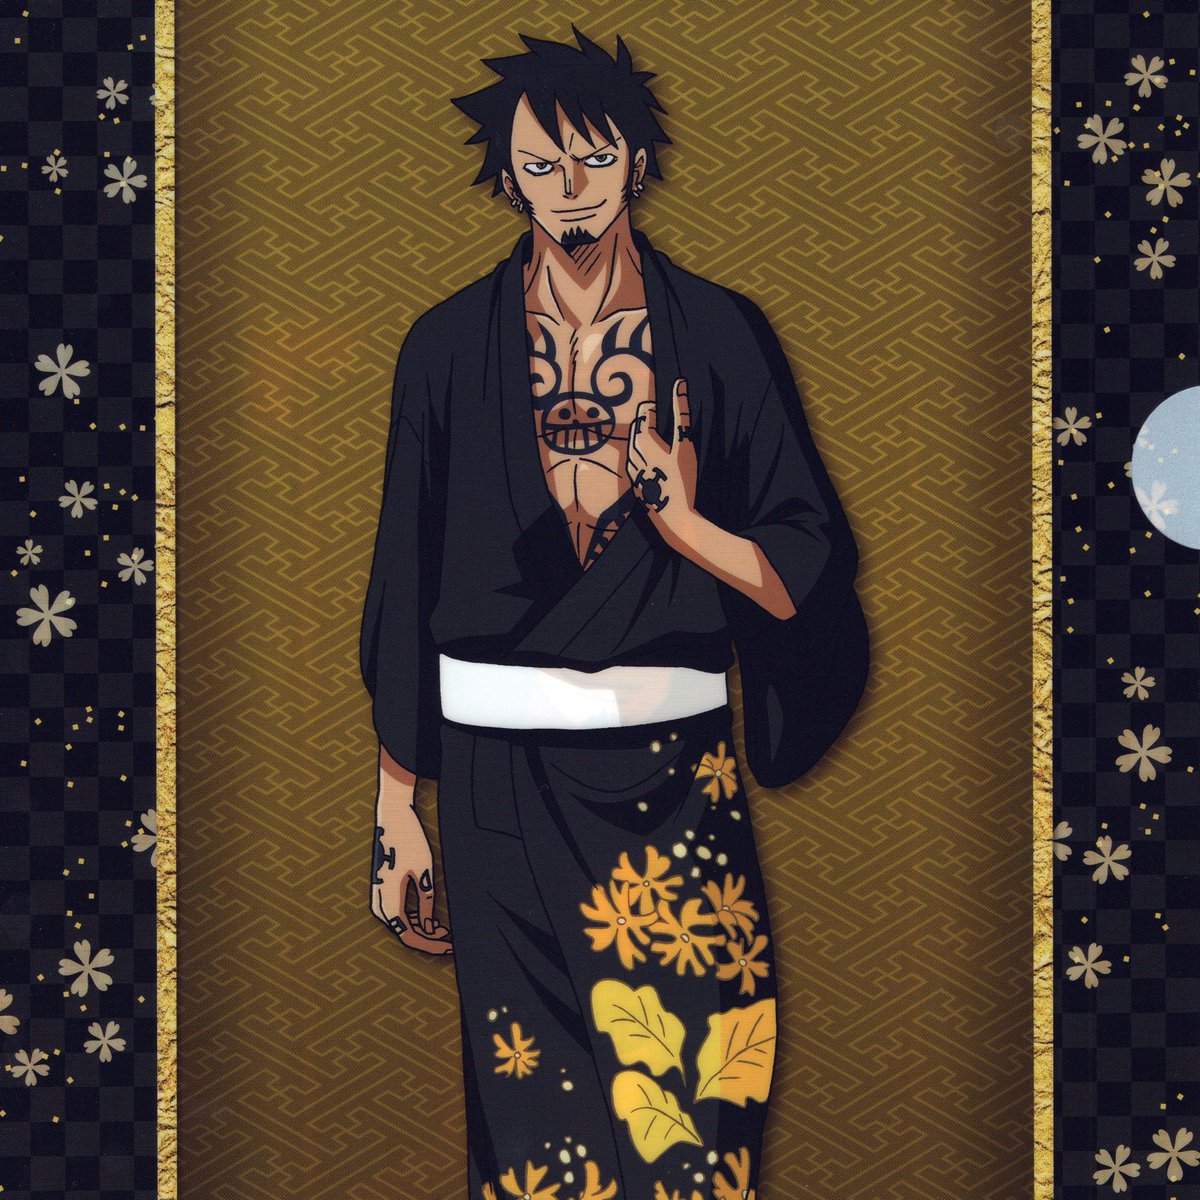 Yukata A: 90/10 He is showing me the goods! YES! Also, I love the flowers, he looks so nice!! YASSS!